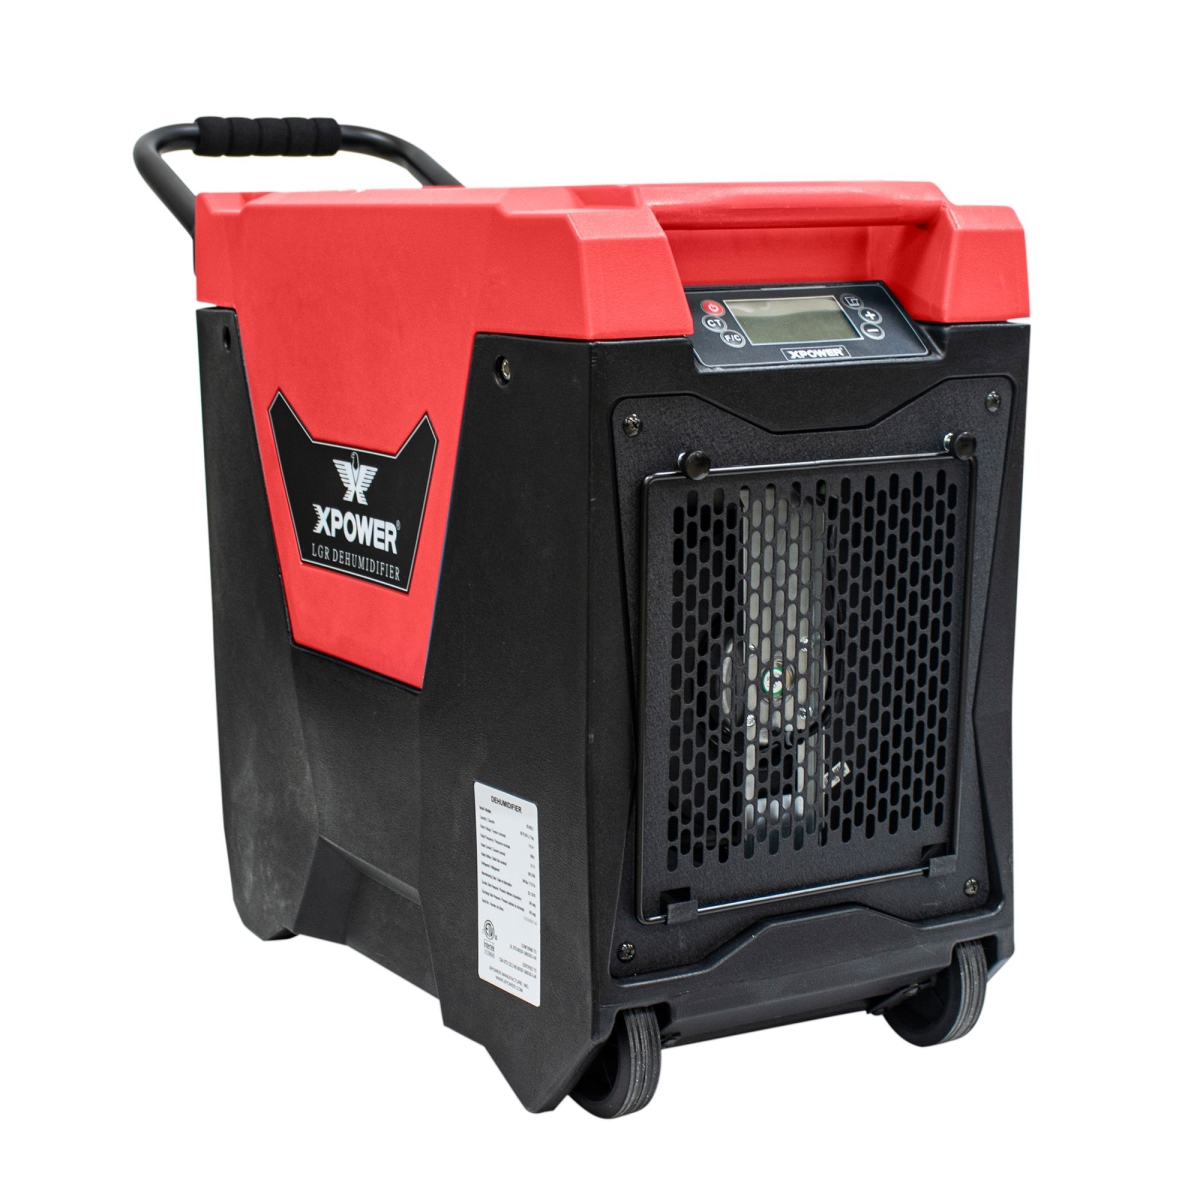 XPOWER XD-85L2-Red 10 ft. LGR Dehumidifier with Automatic Purge Pump, Red